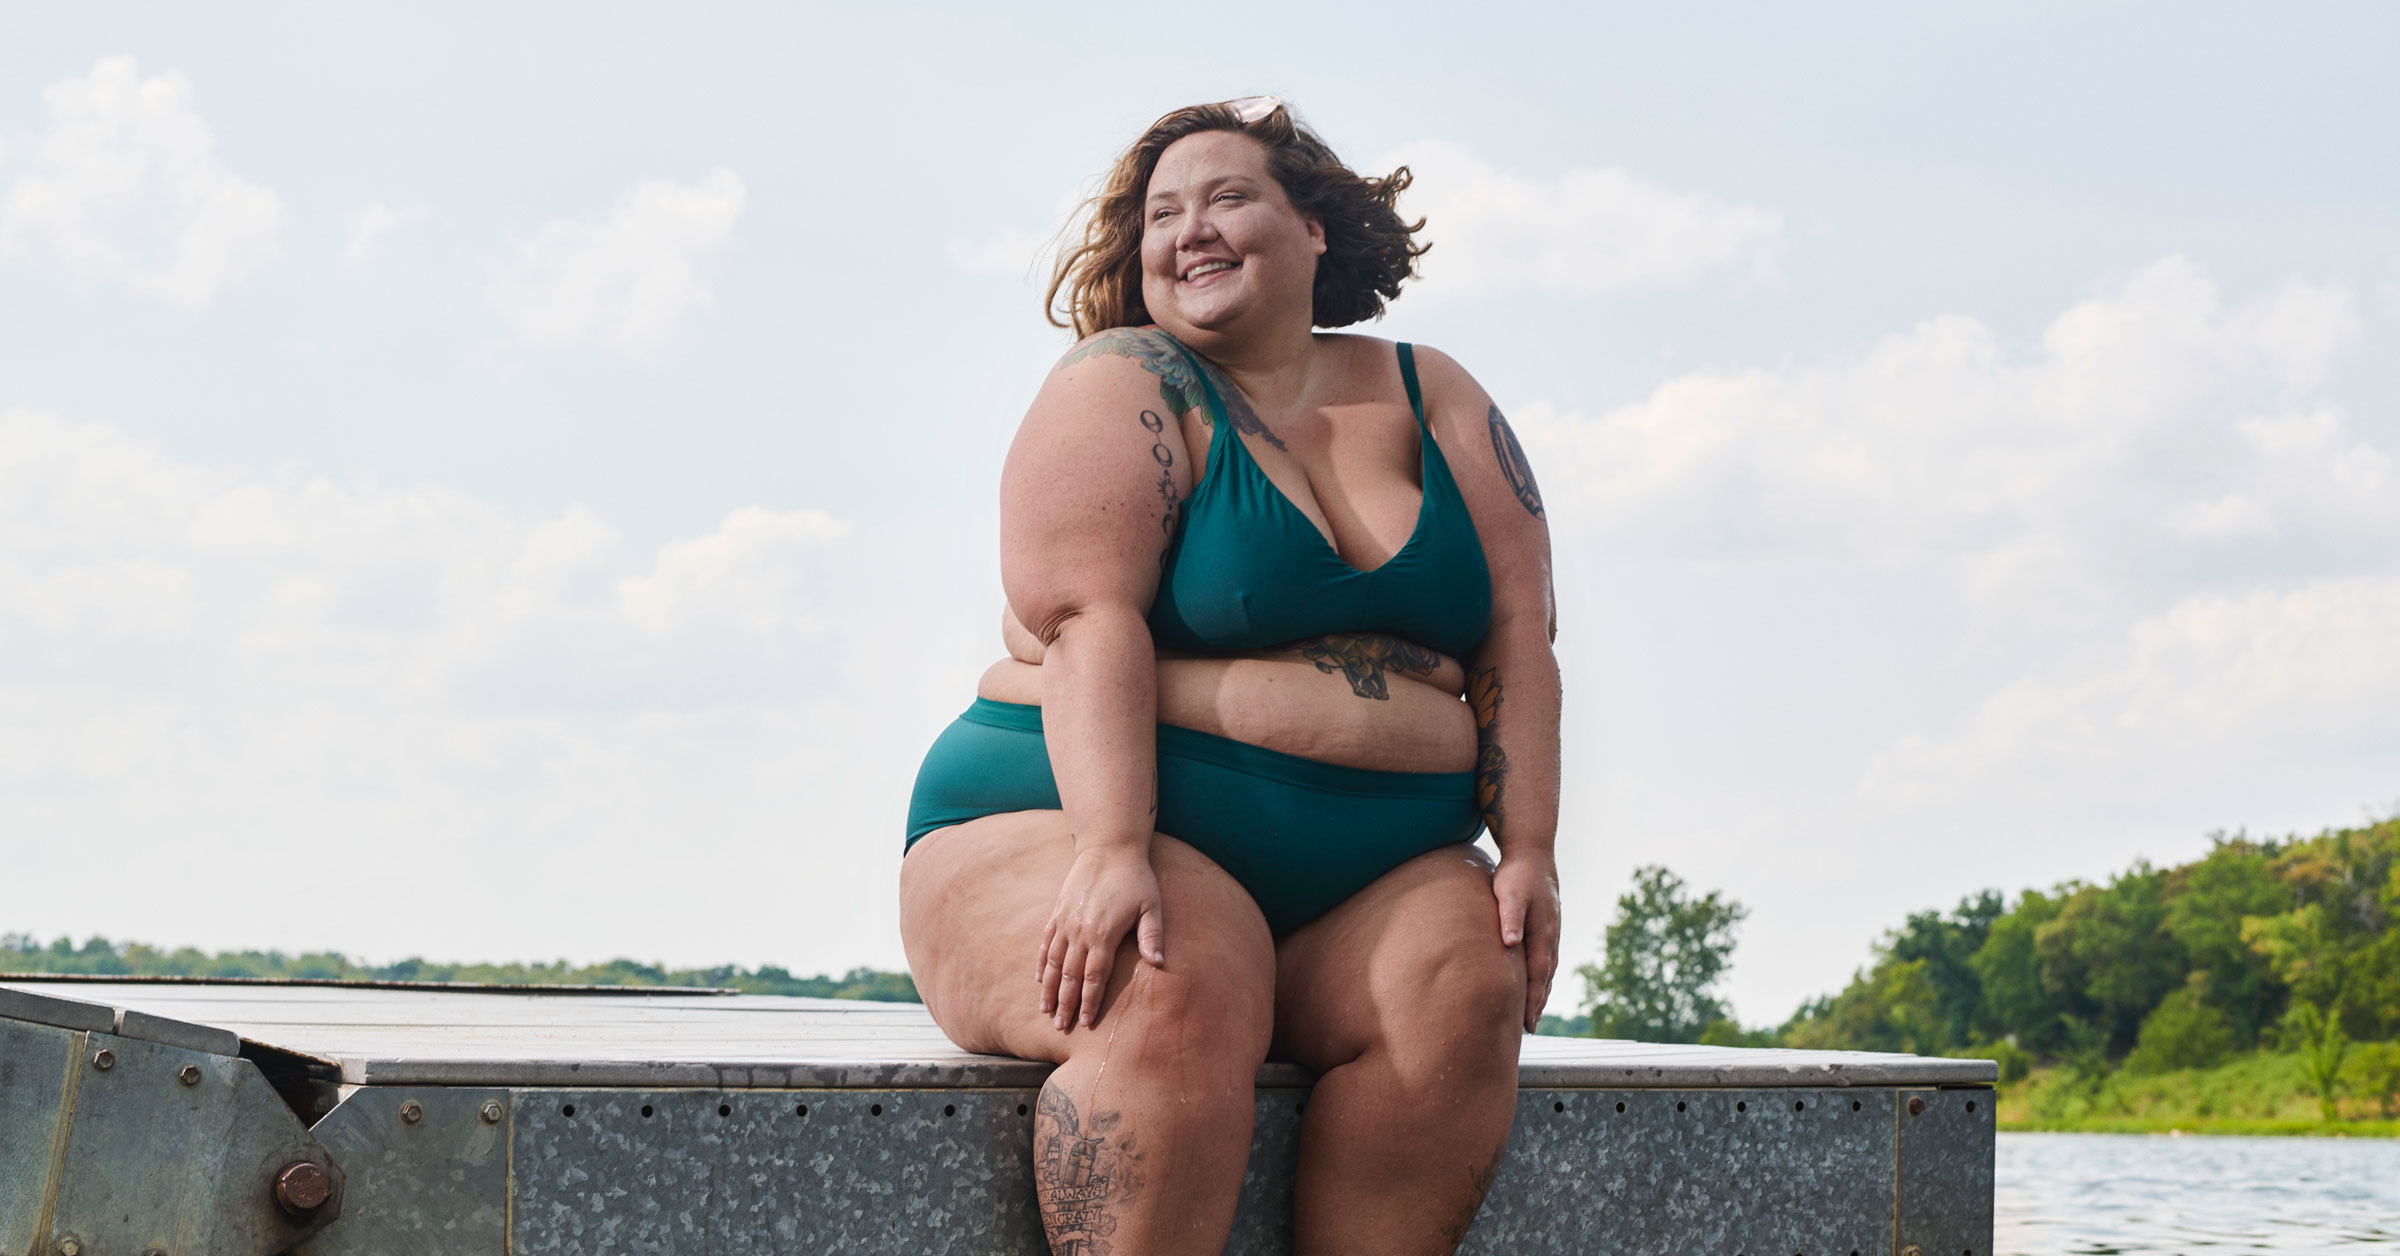 Fat women why like skinny do guys We Asked